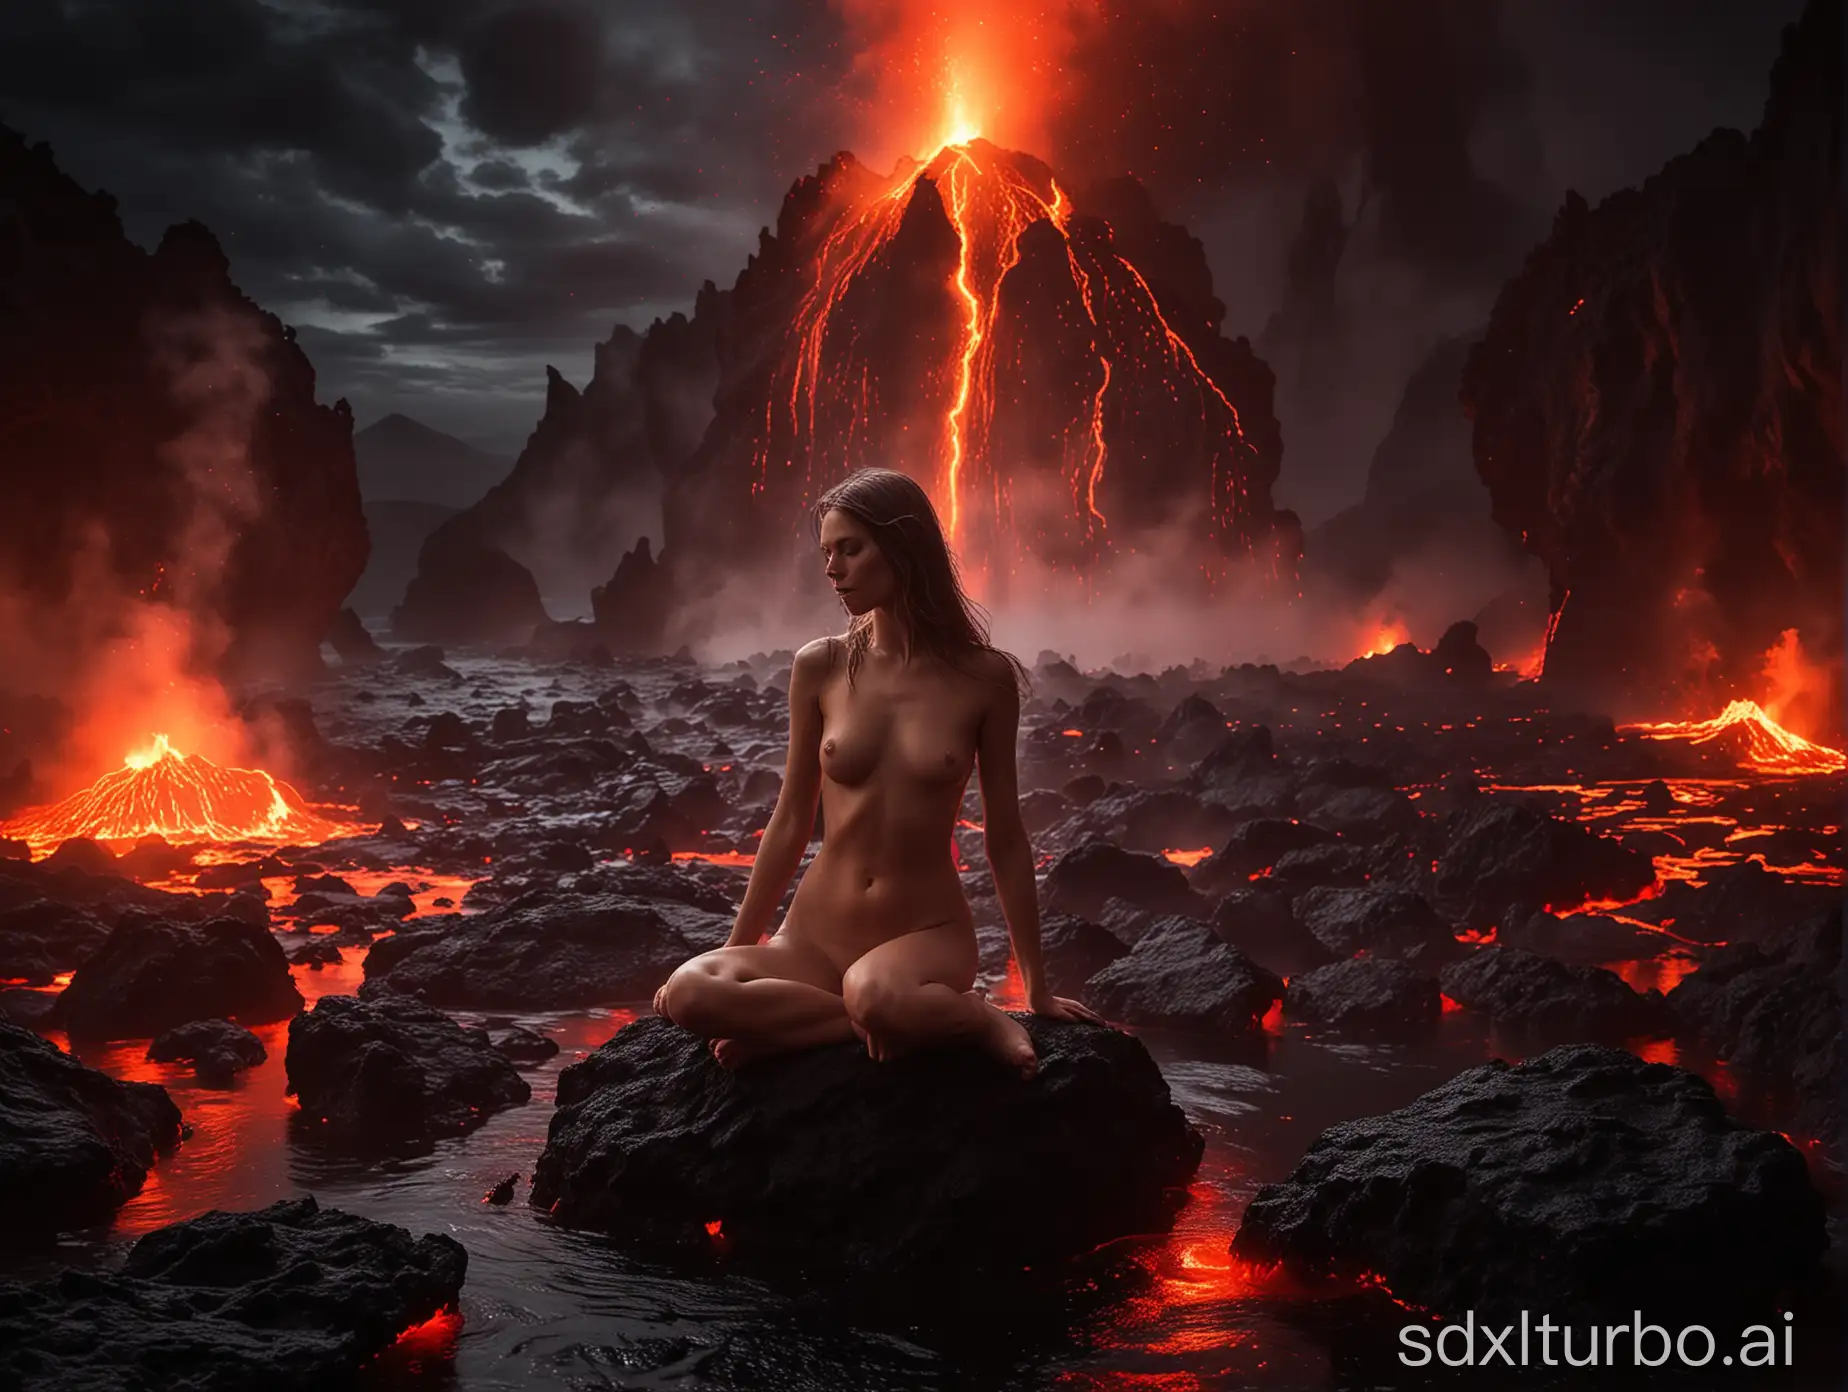 naked female model sitting on black rock, surrounded by sea of floating glowing lava. Night, ethereal grace in a black and red. Backlighting illuminates the volcanic landscape, smoke swirling around like a misty dream, full nude body. Erupting volcano in background